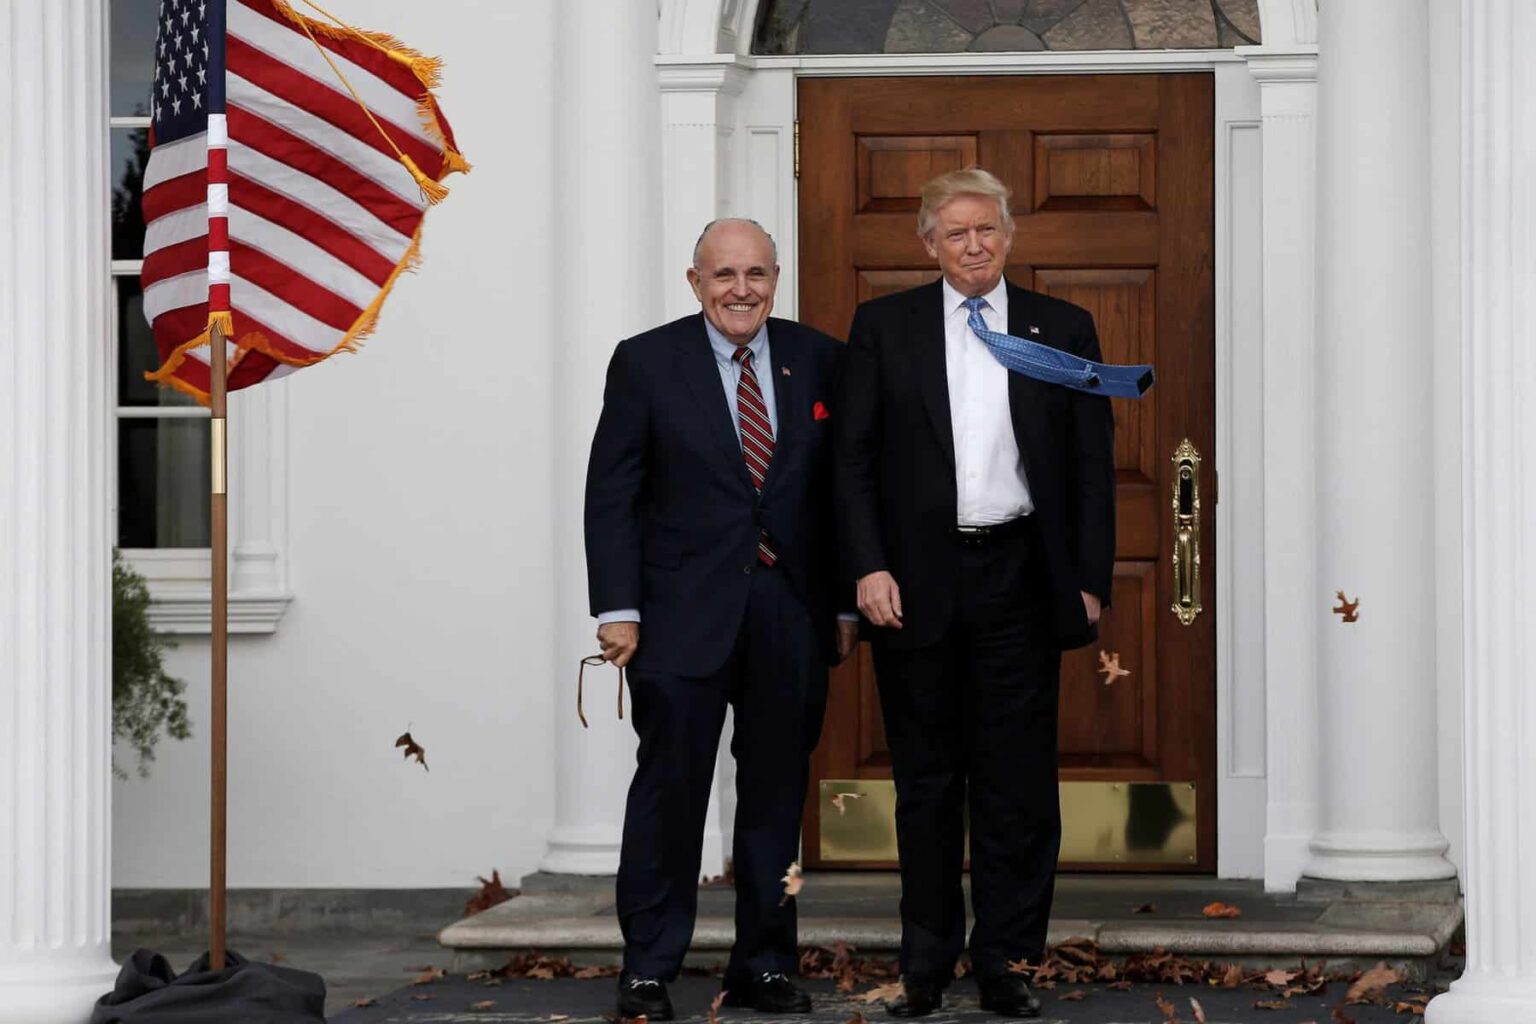 Rudy Giuliani accused of selling presidential pardons and splitting money with Trump